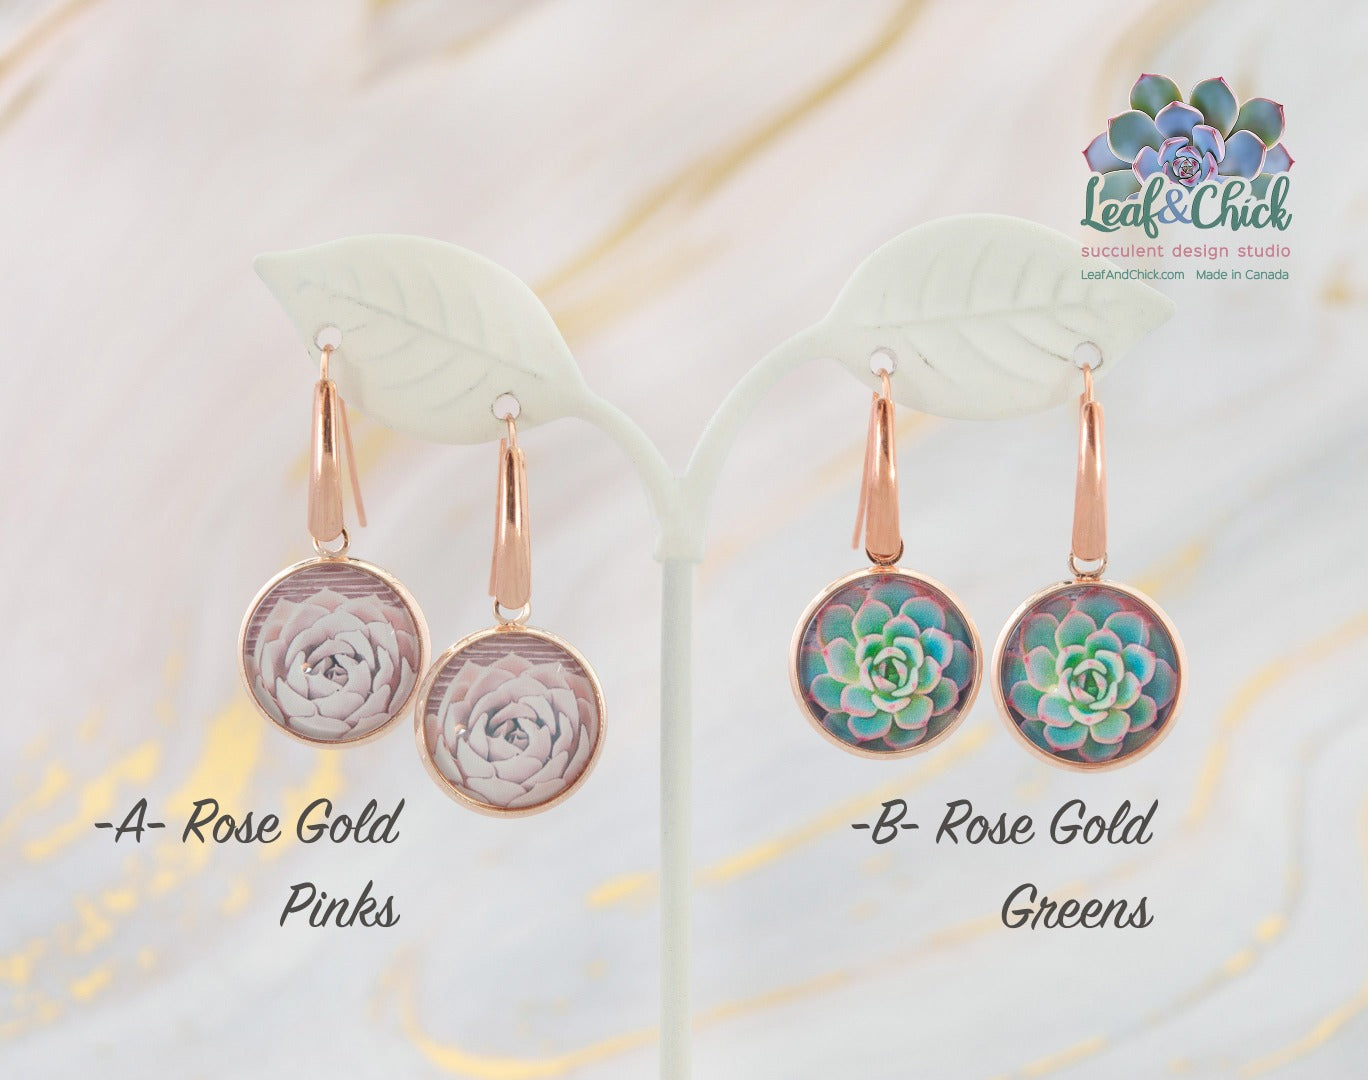 both styles of rose gold dangle earrings labelled with A-pinks, B- greens